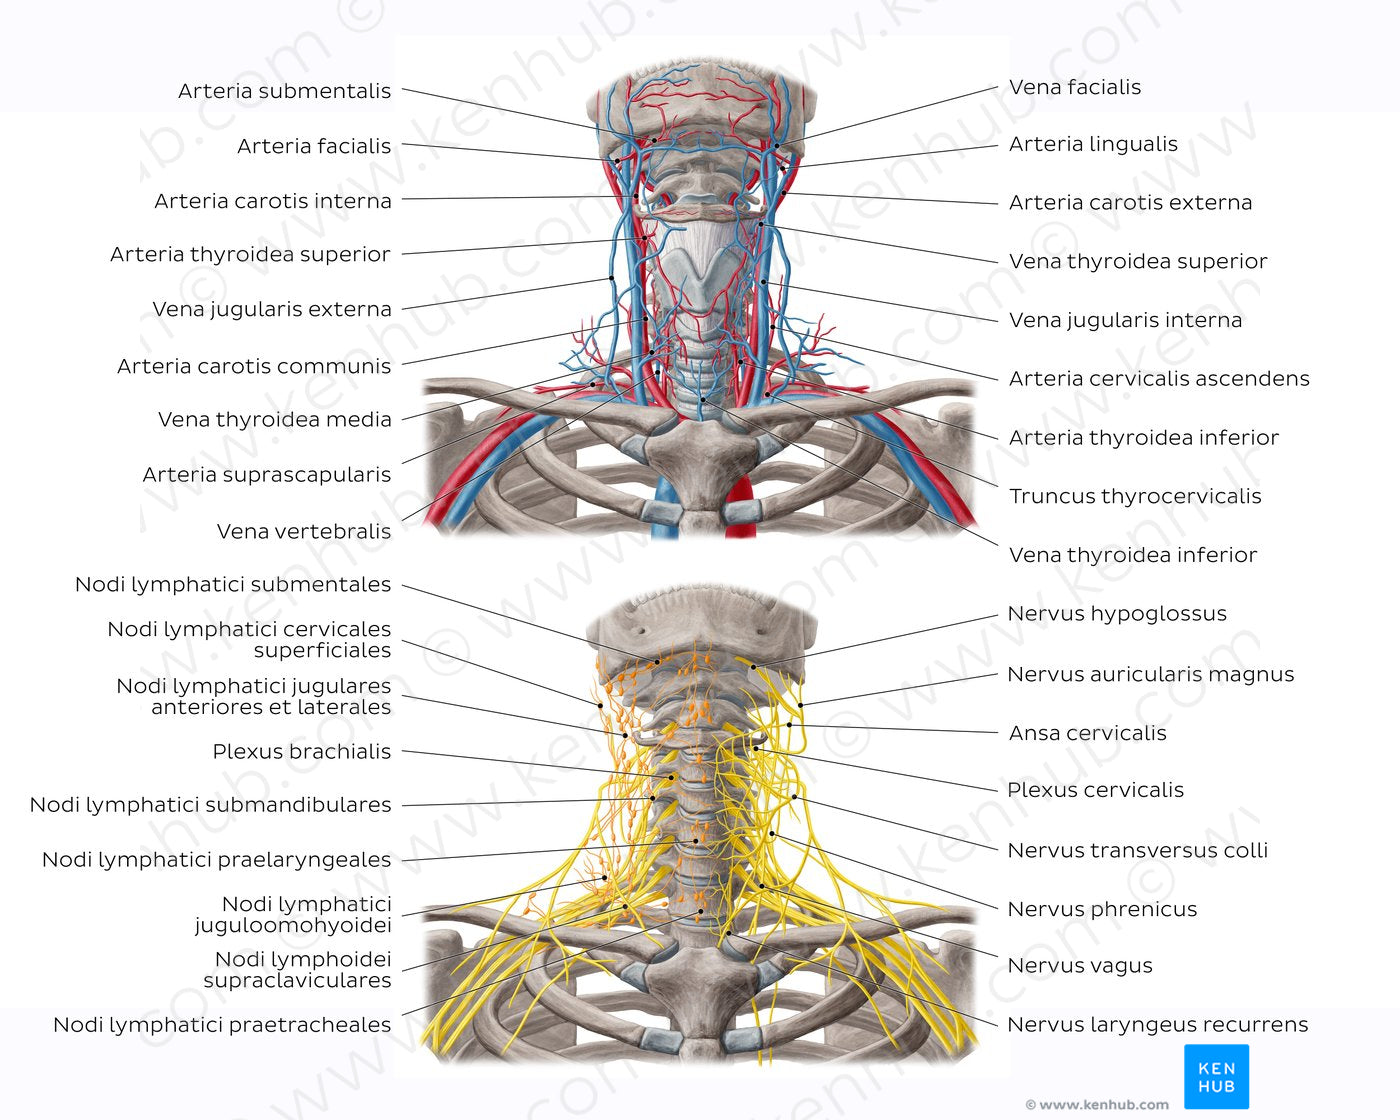 Neurovasculature and lymph nodes of the neck (Latin)